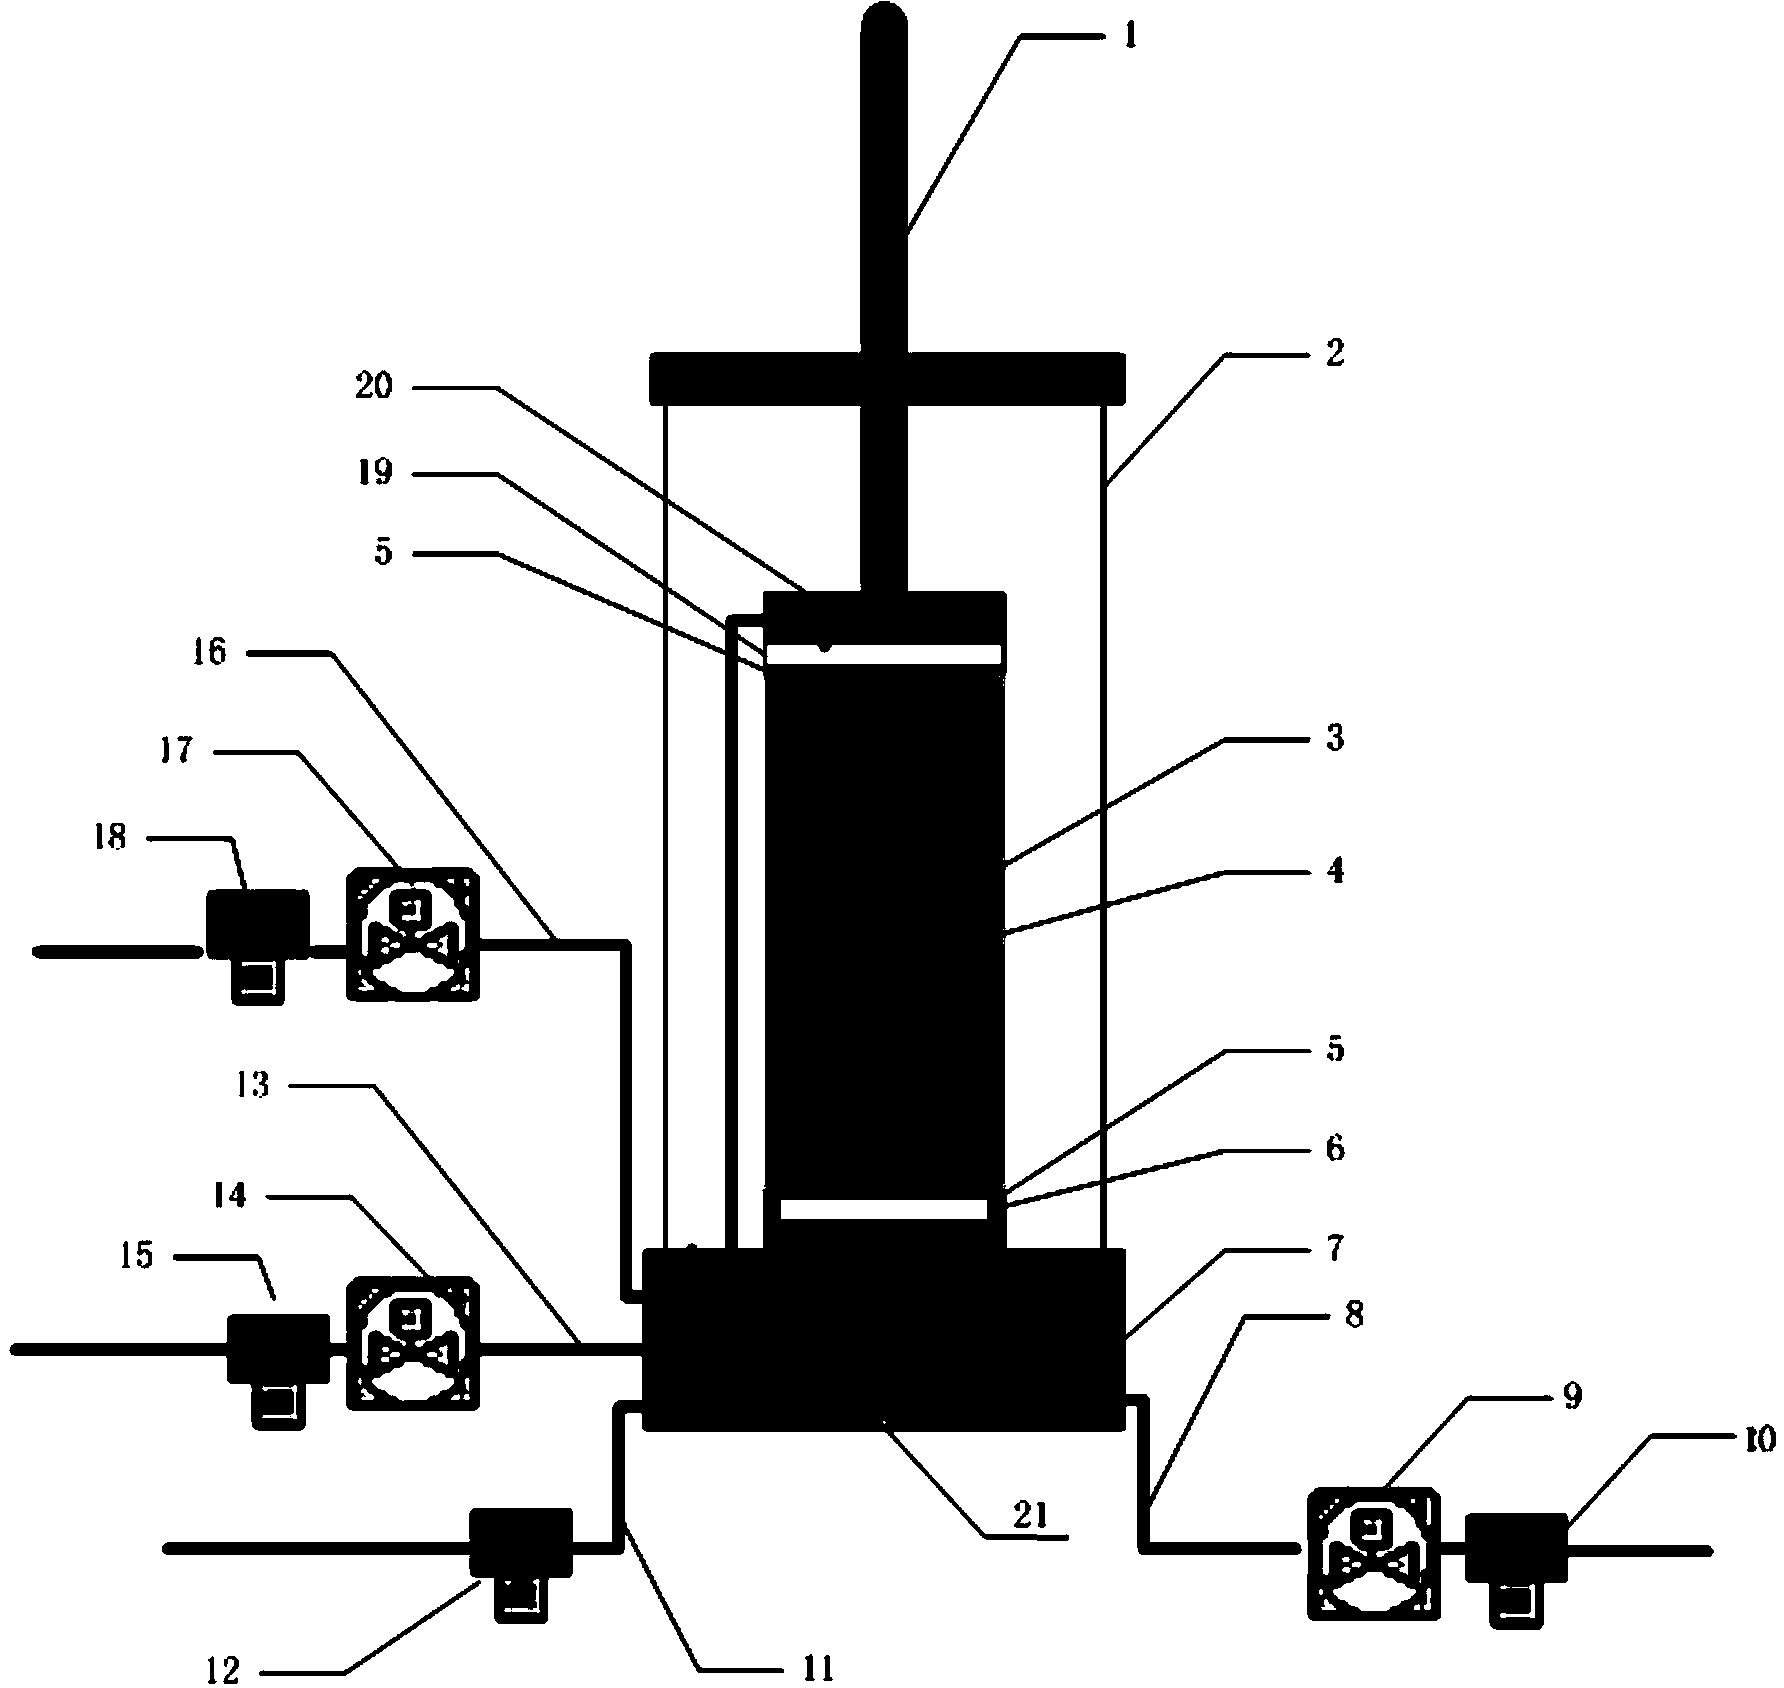 Matrix suction force control method for substrate dry-wet cycle test